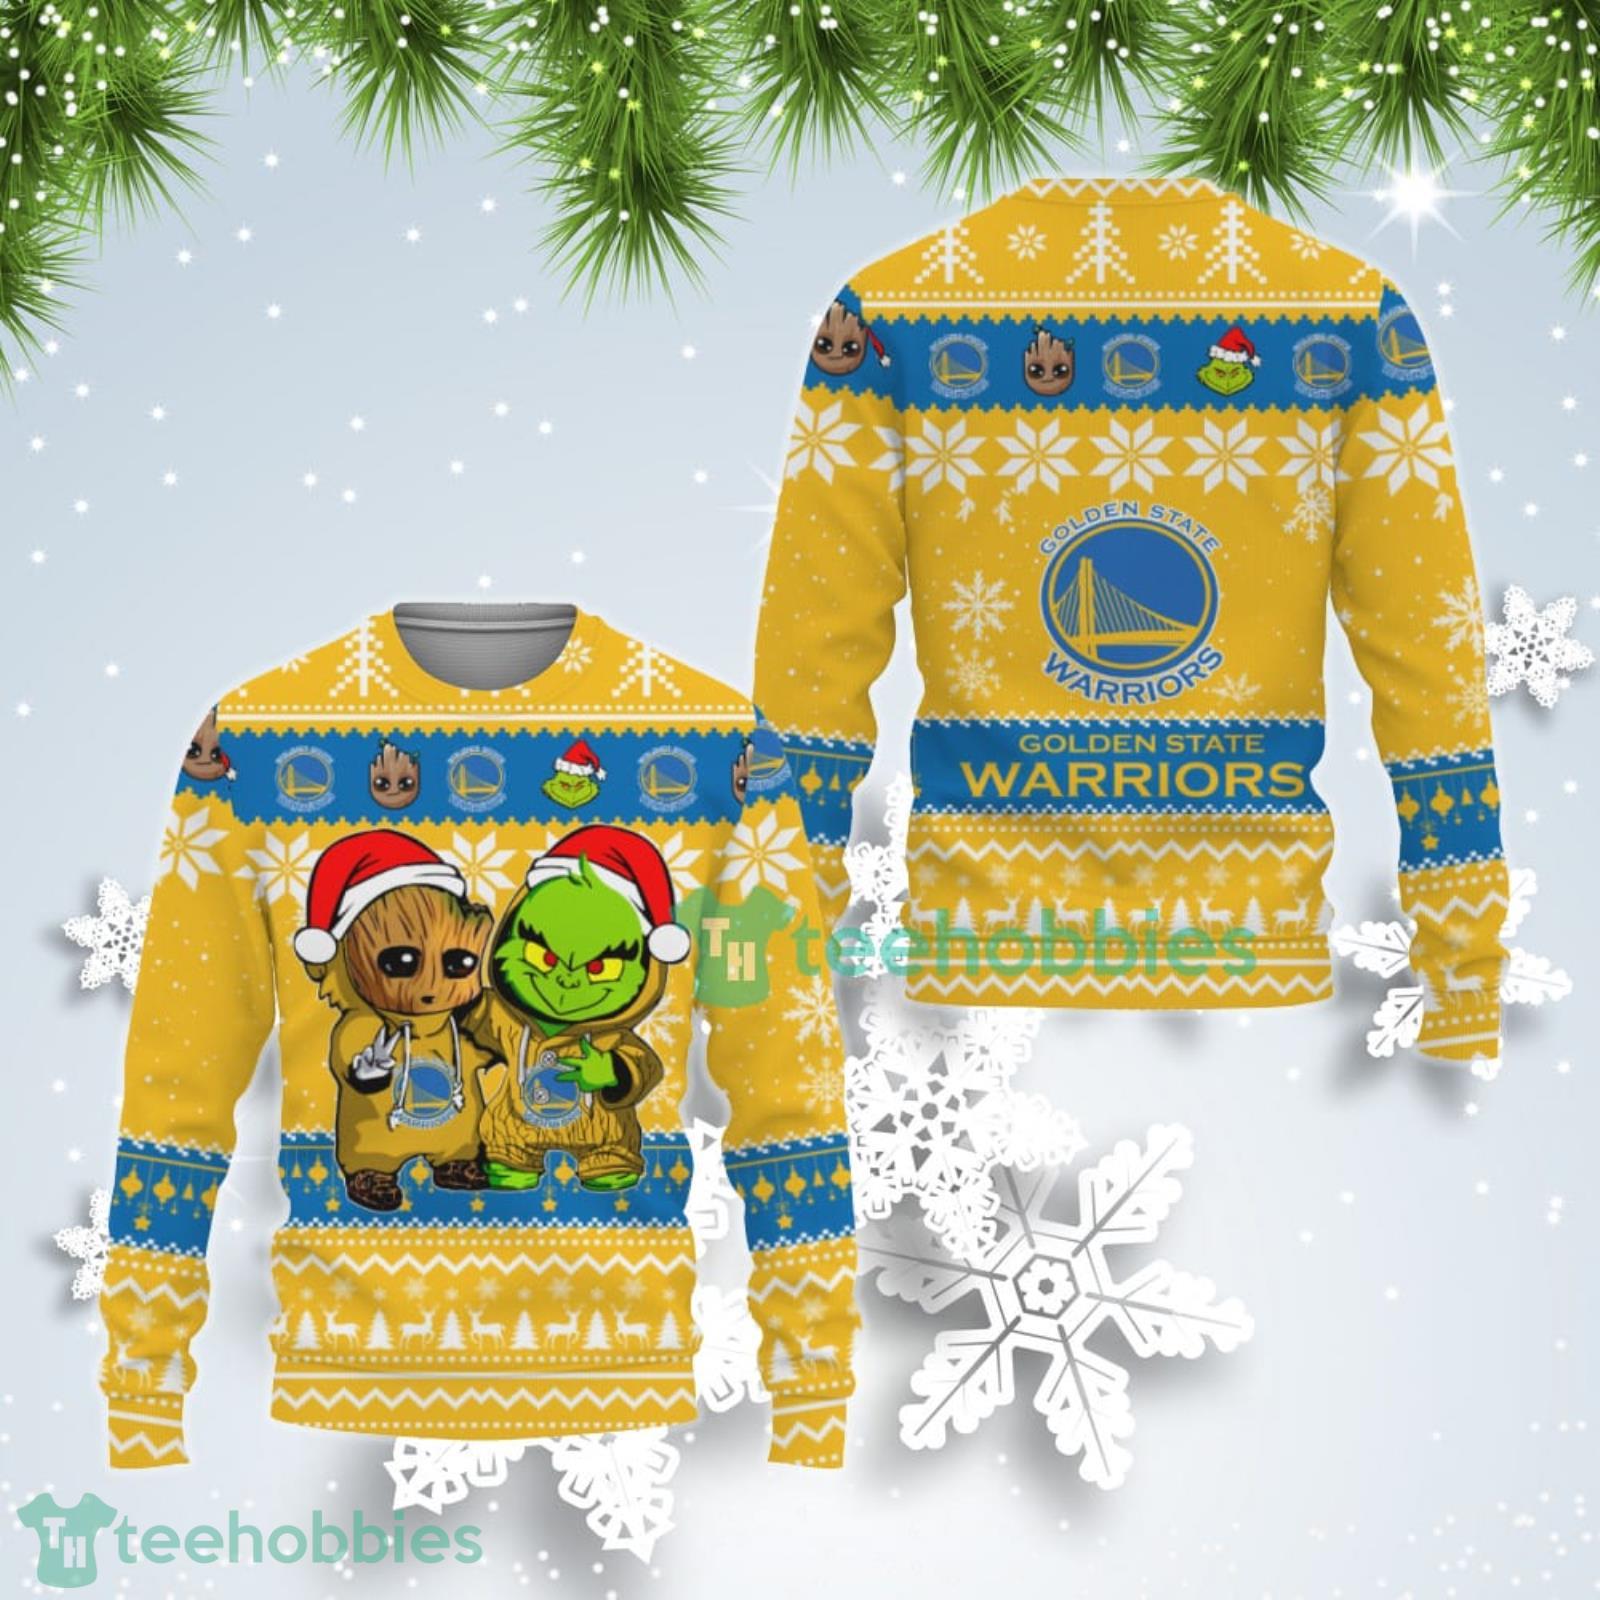 Golden State Warriors Baby Groot And Grinch Best Friends Ugly Christmas Sweater Product Photo 1